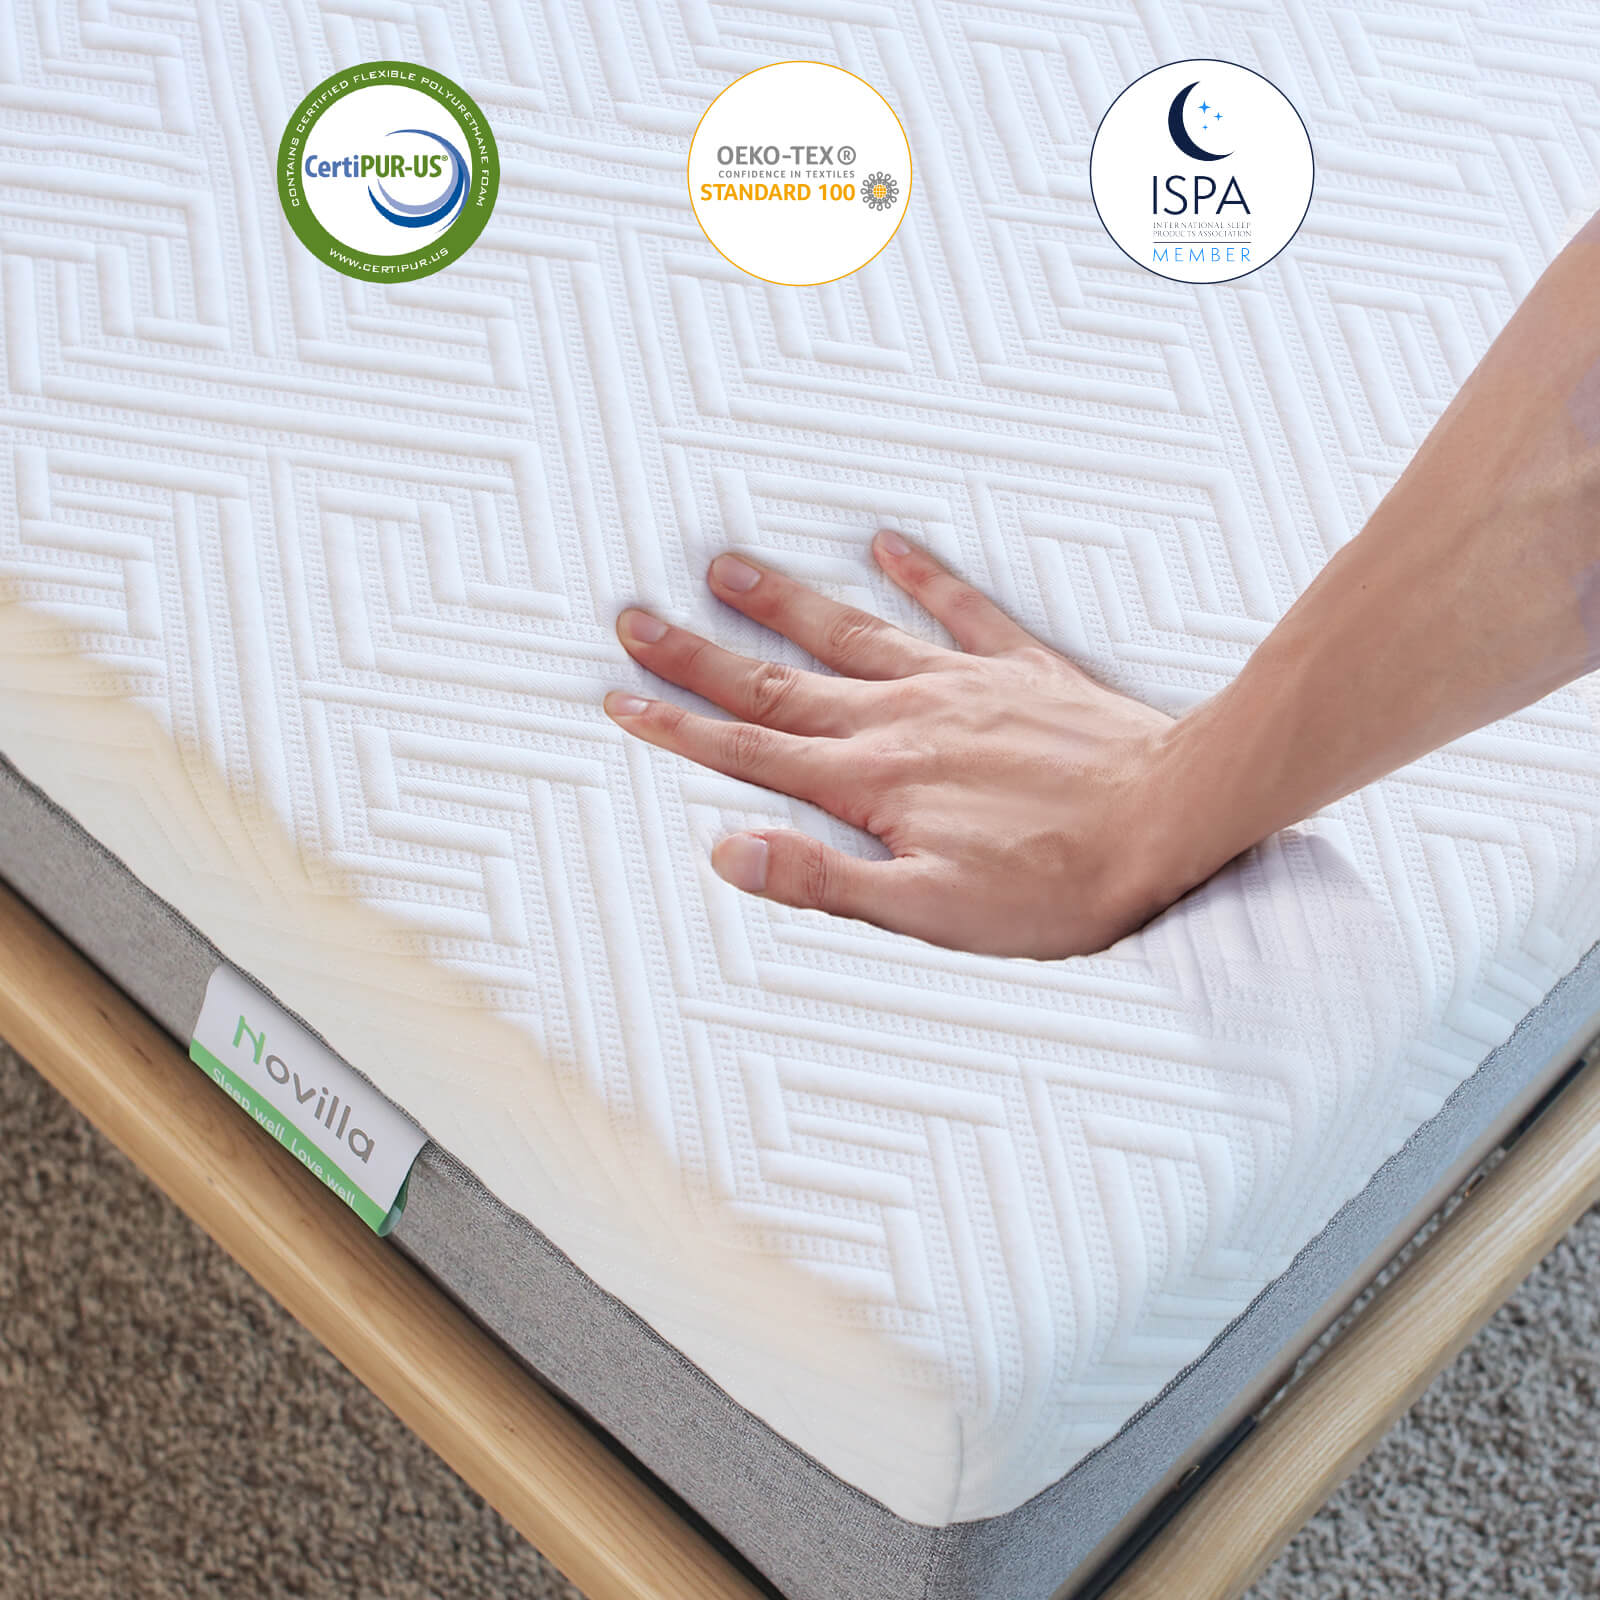 6/8/10/12 inch Gel Memory Foam Mattress for Cool Sleep & Pressure Relief,  Medium Firm Mattresses CertiPUR-US Certified/Bed-in-a-Box/Pressure  Relieving